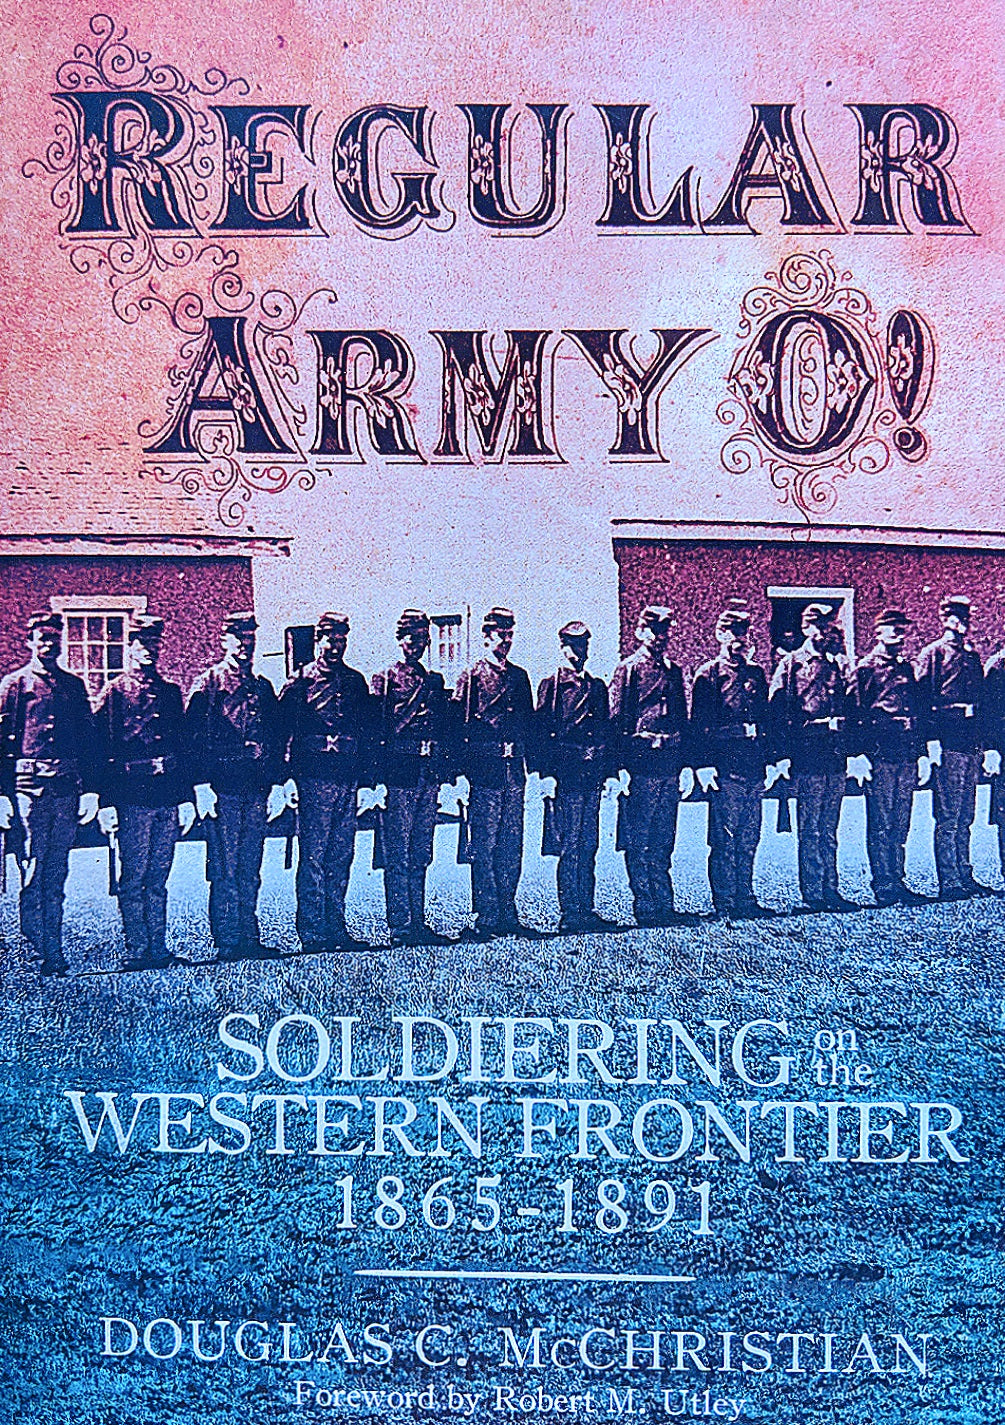 Regular Army O! Soldiering on the Western Frontier